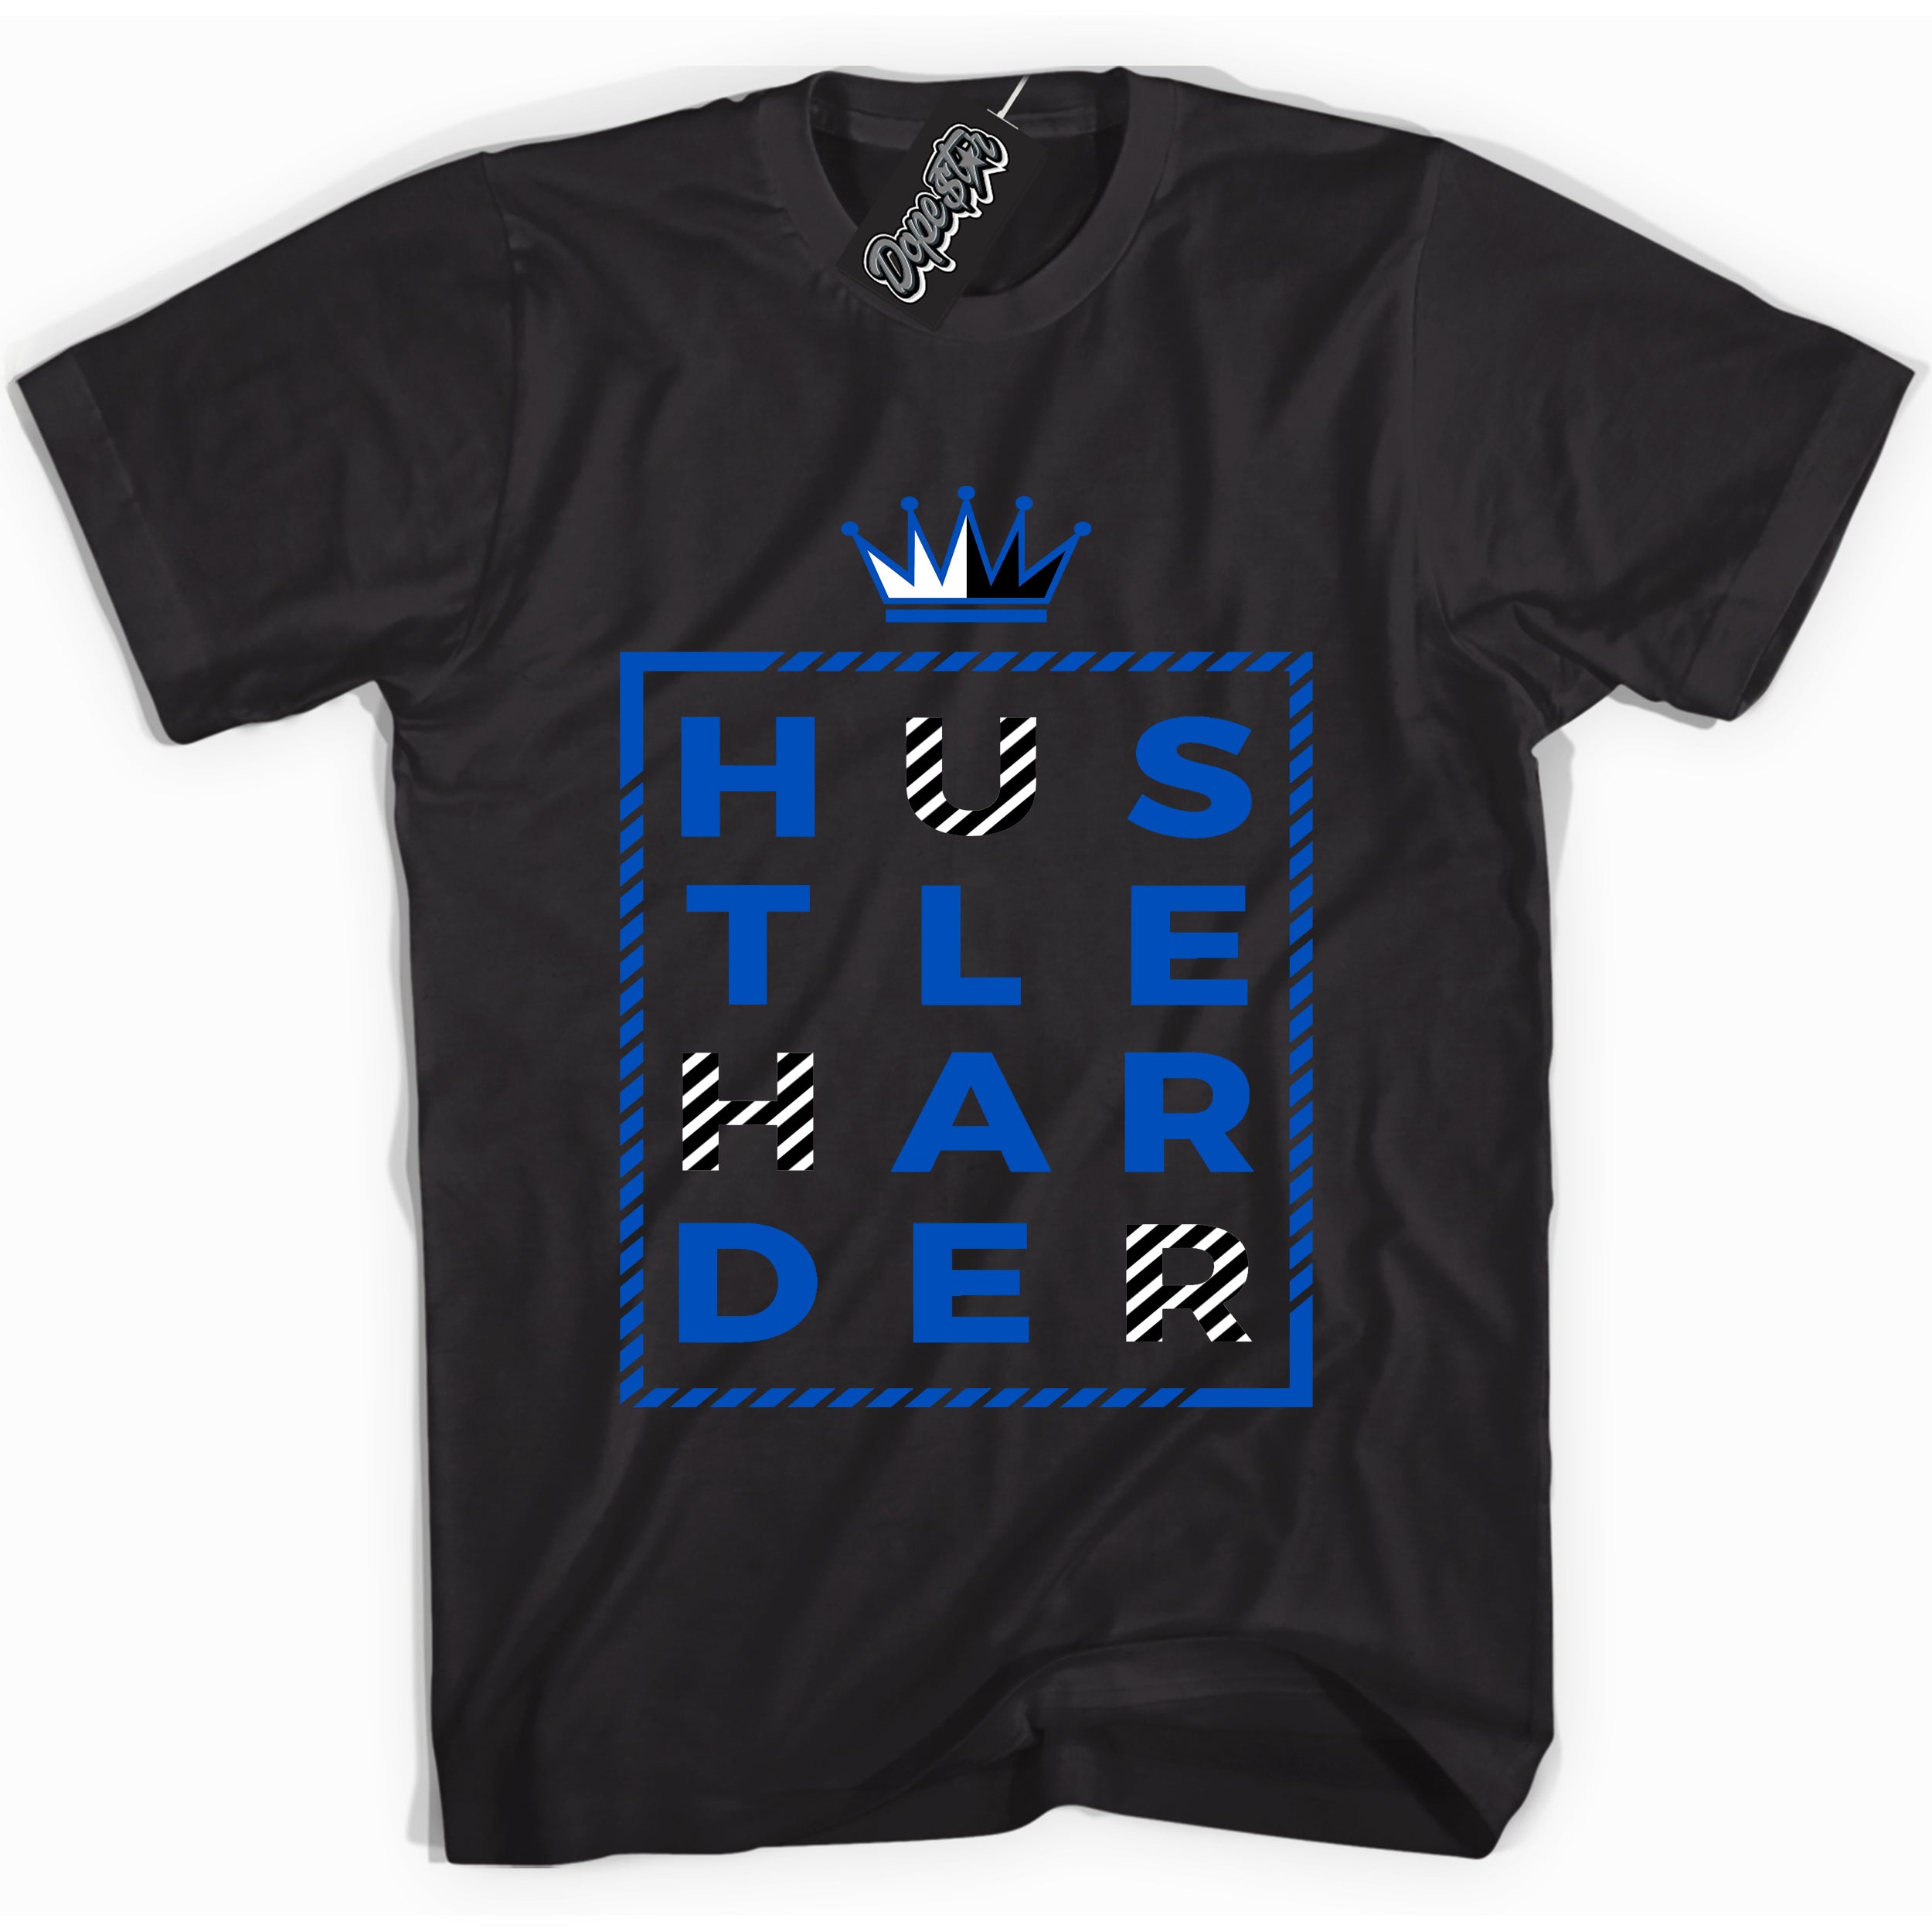 Cool Black graphic tee with "Hustle Harder" design, that perfectly matches Royal Reimagined 1s sneakers 